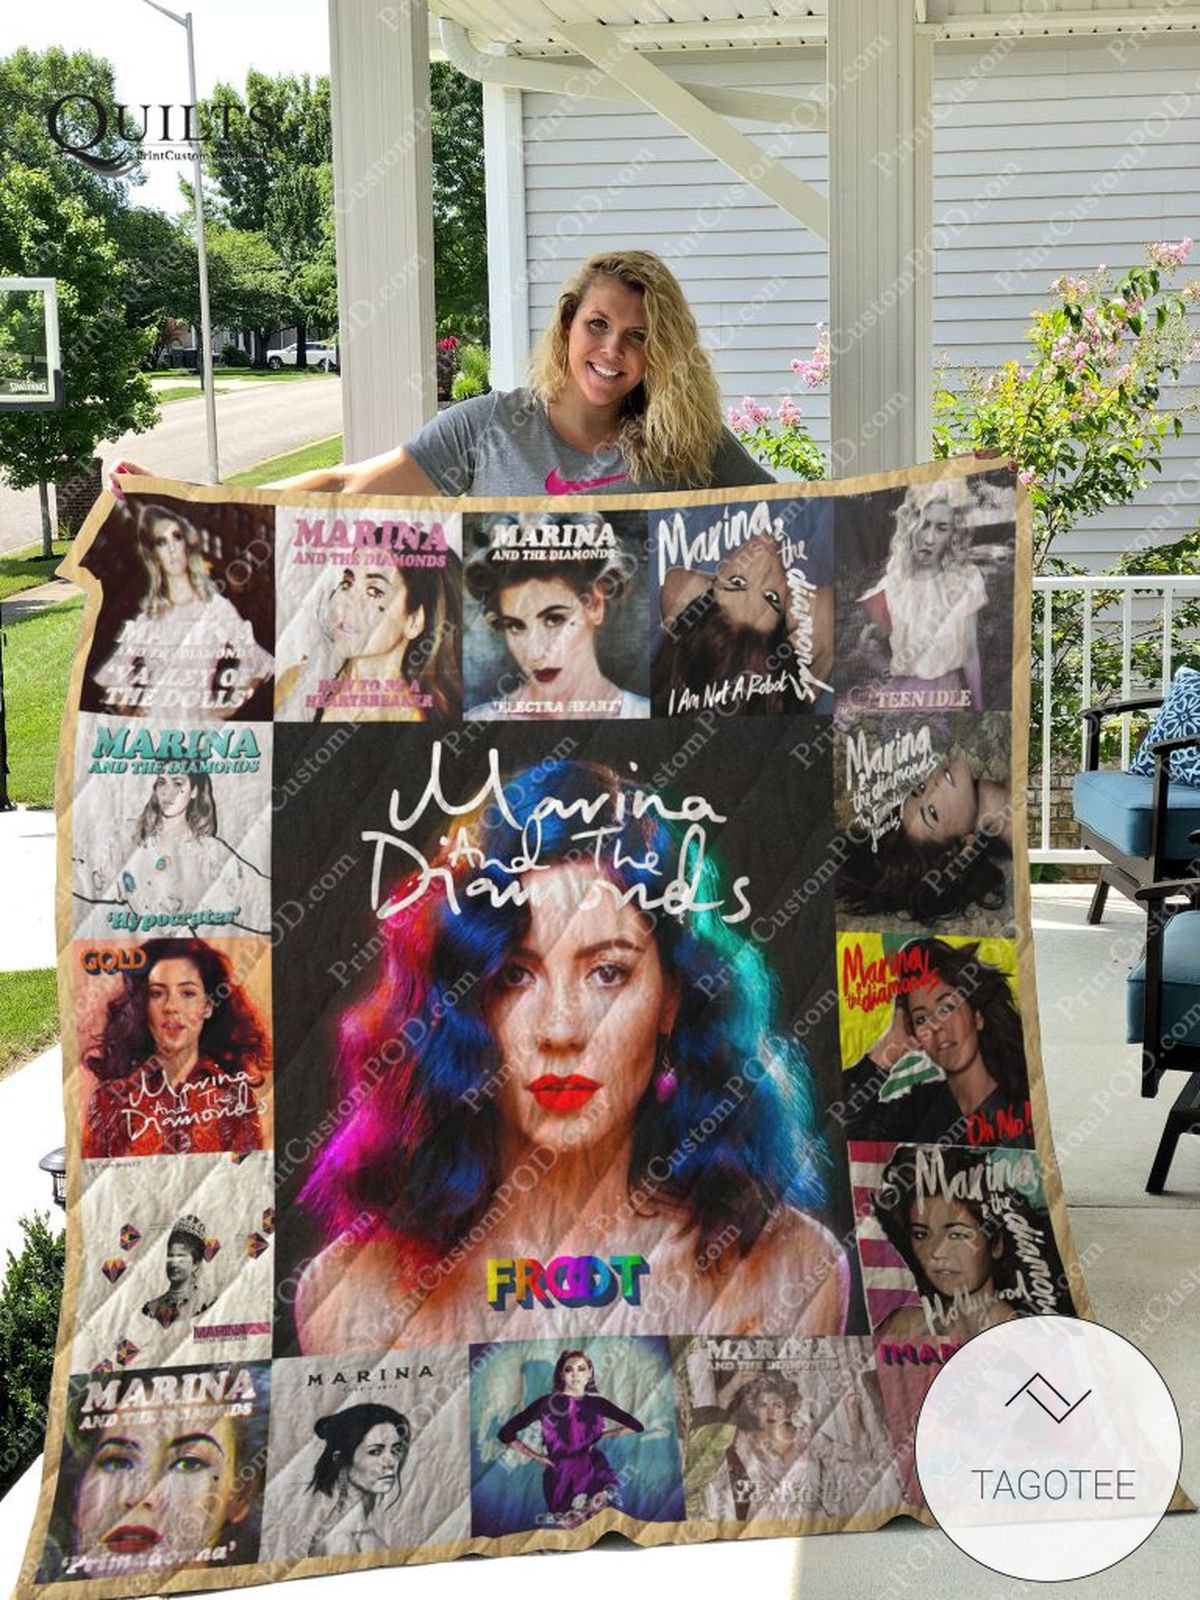 Marina And The Diamond Albums For Fans Version Quilt Blanket